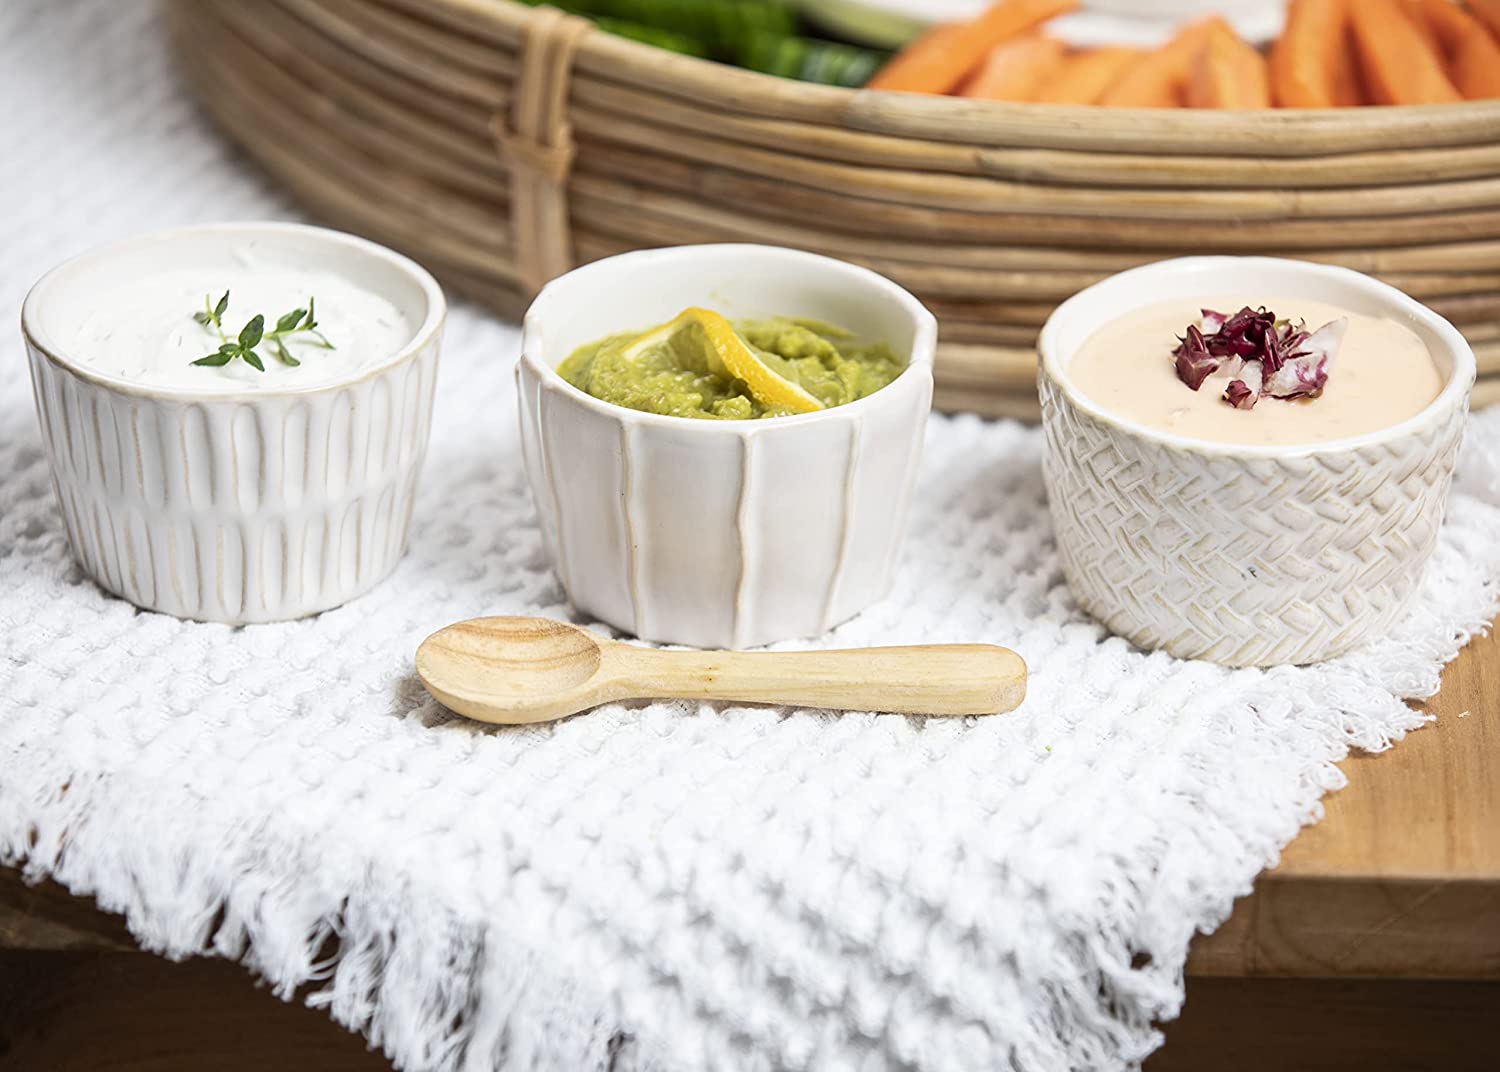 all three textured ramekins filled with dip and displayed next to a veggie tray on a white table runner